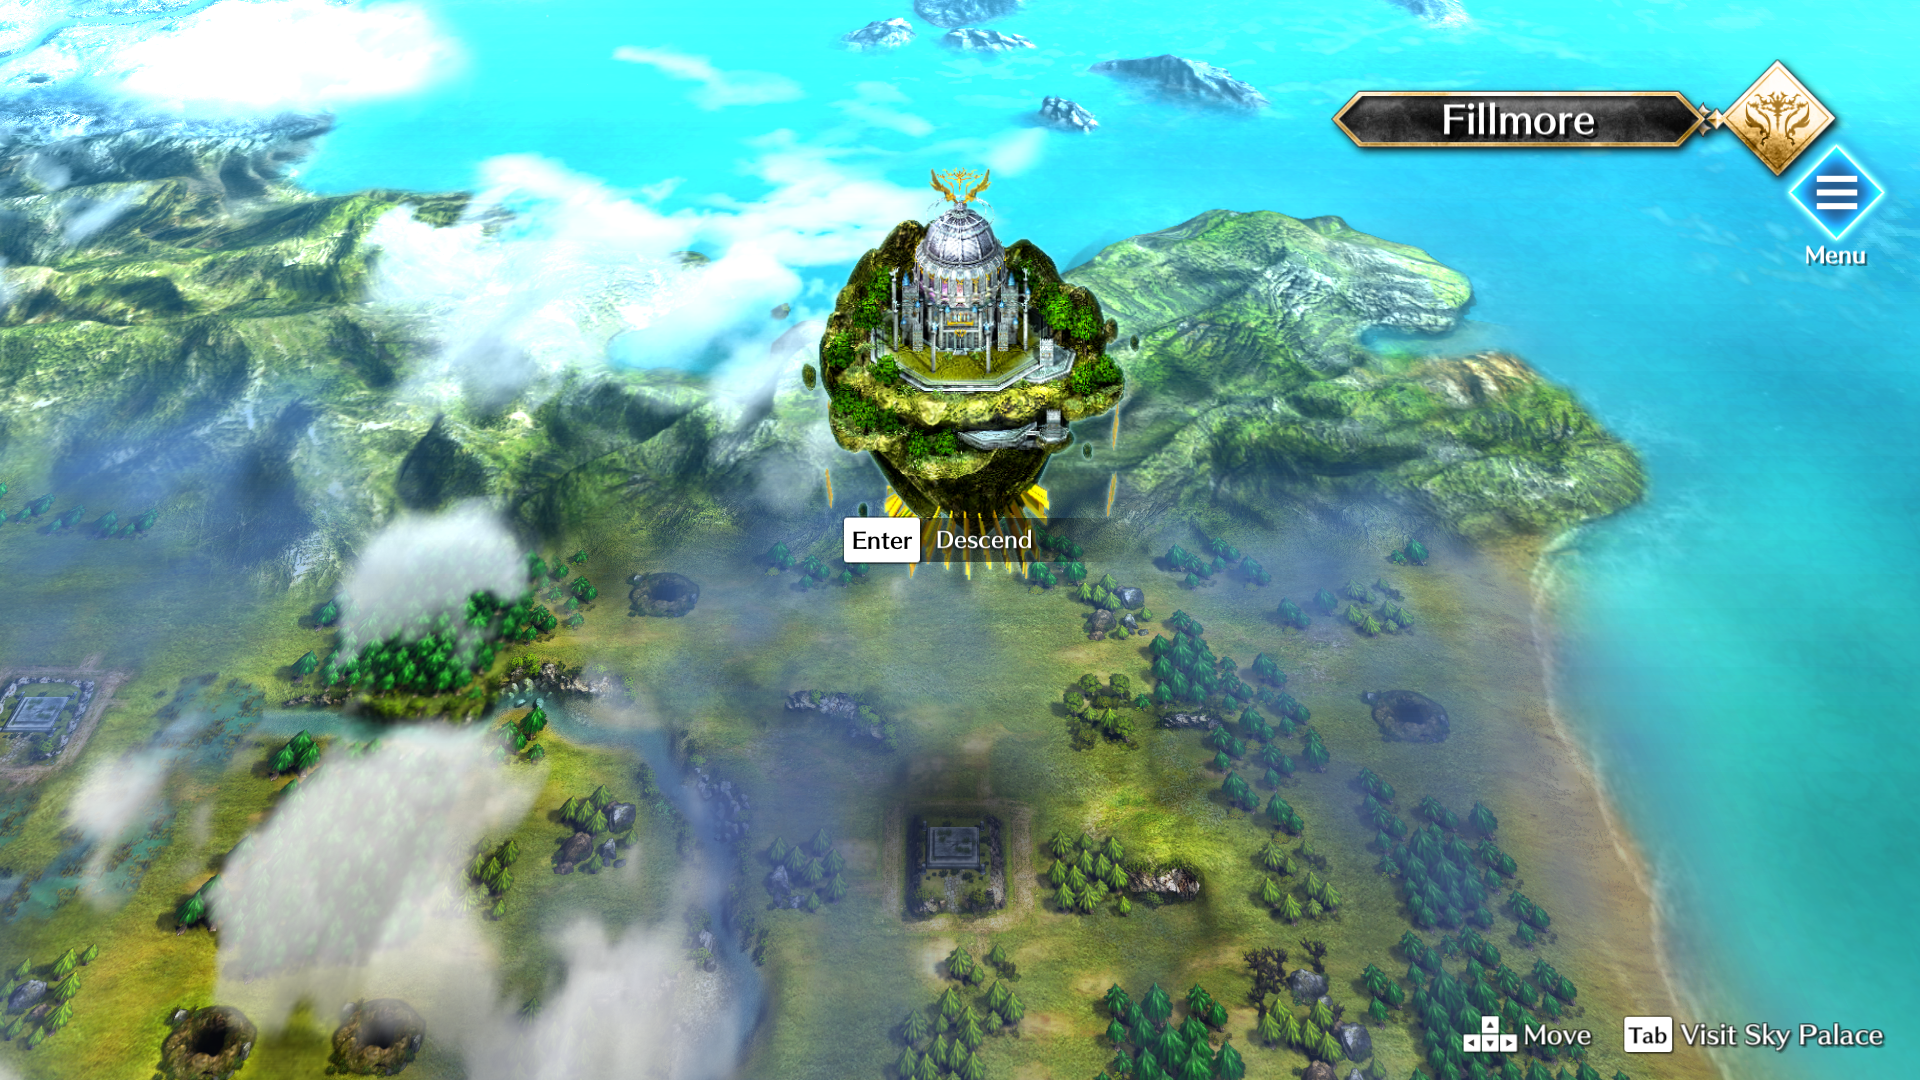 Gameplay screenshot of Actraiser Renaissance showing the Sky Palace on a map.